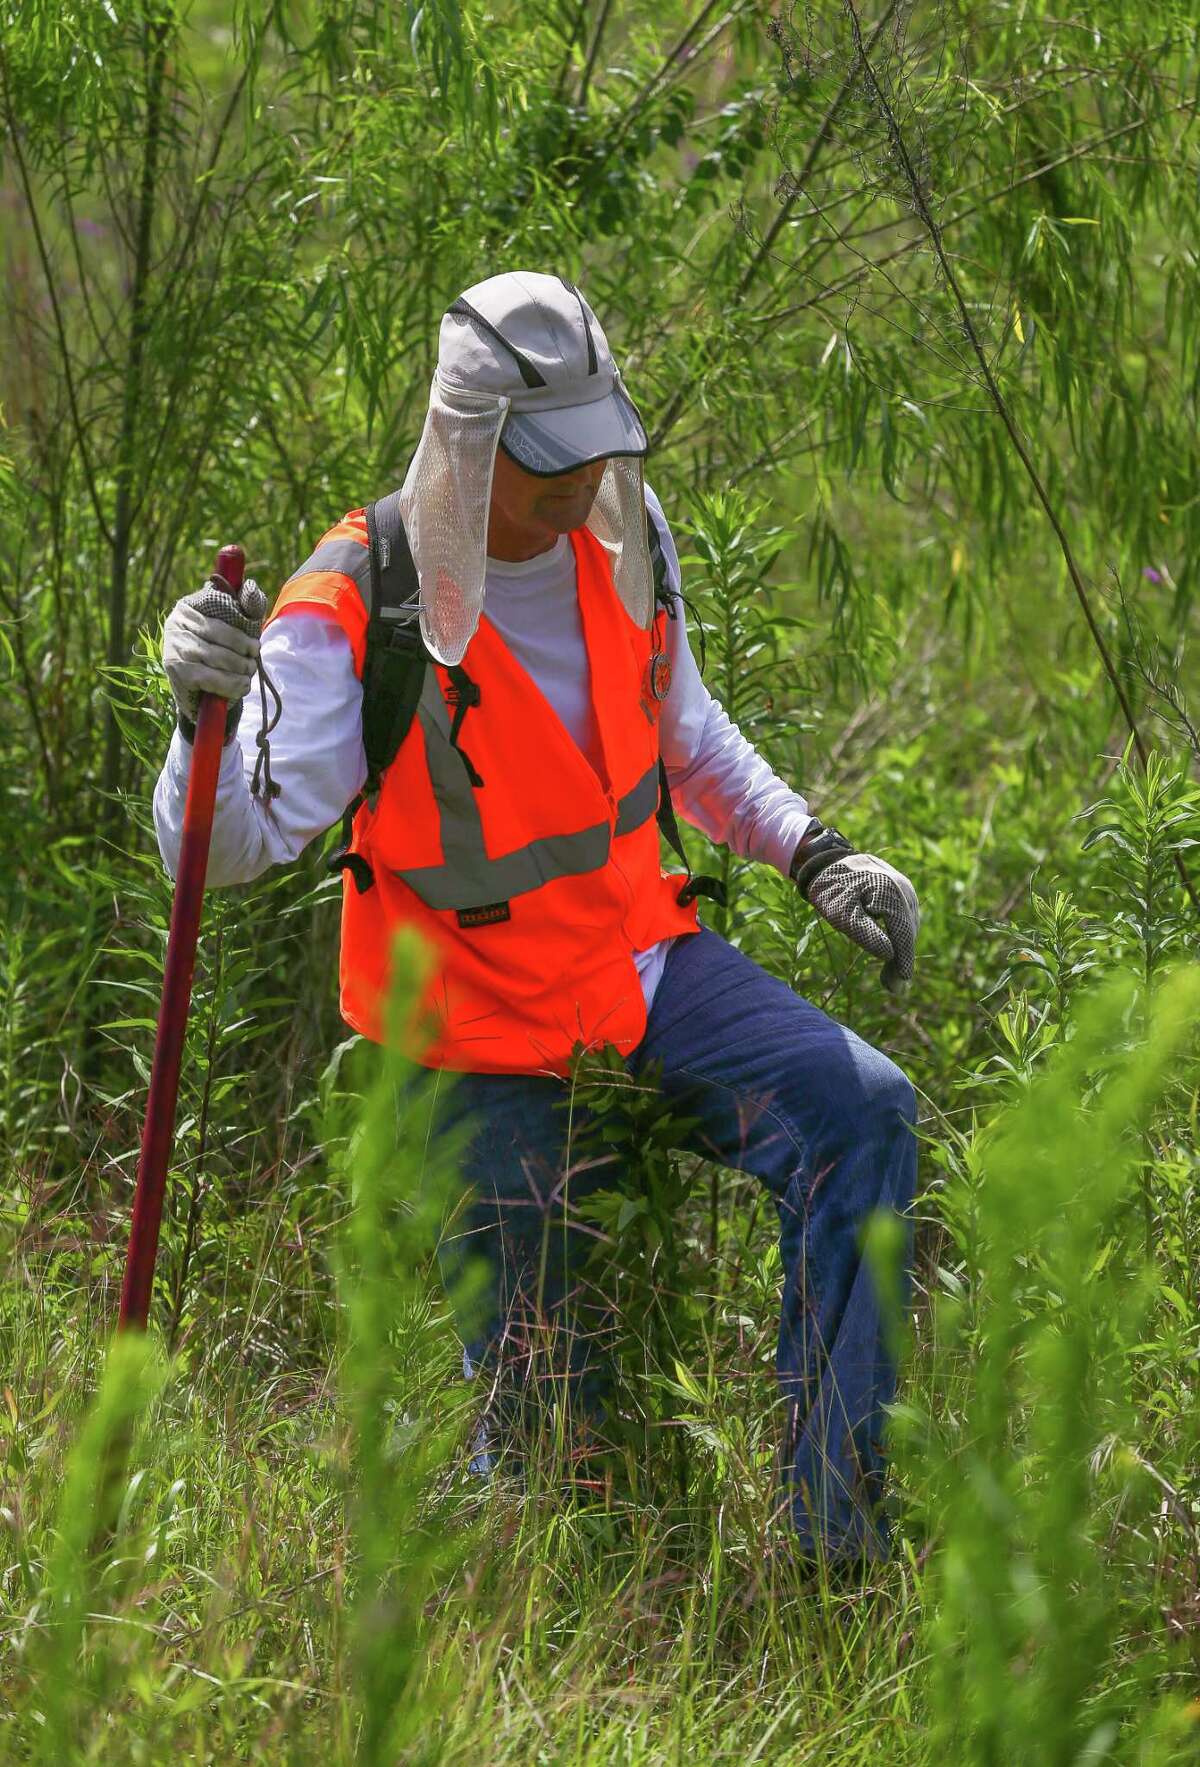 Jim Reynolds, with Texas EquuSearch, conducts a search for four-year-old Maleah Davis Monday, May 6, 2019, in Humble, Texas.